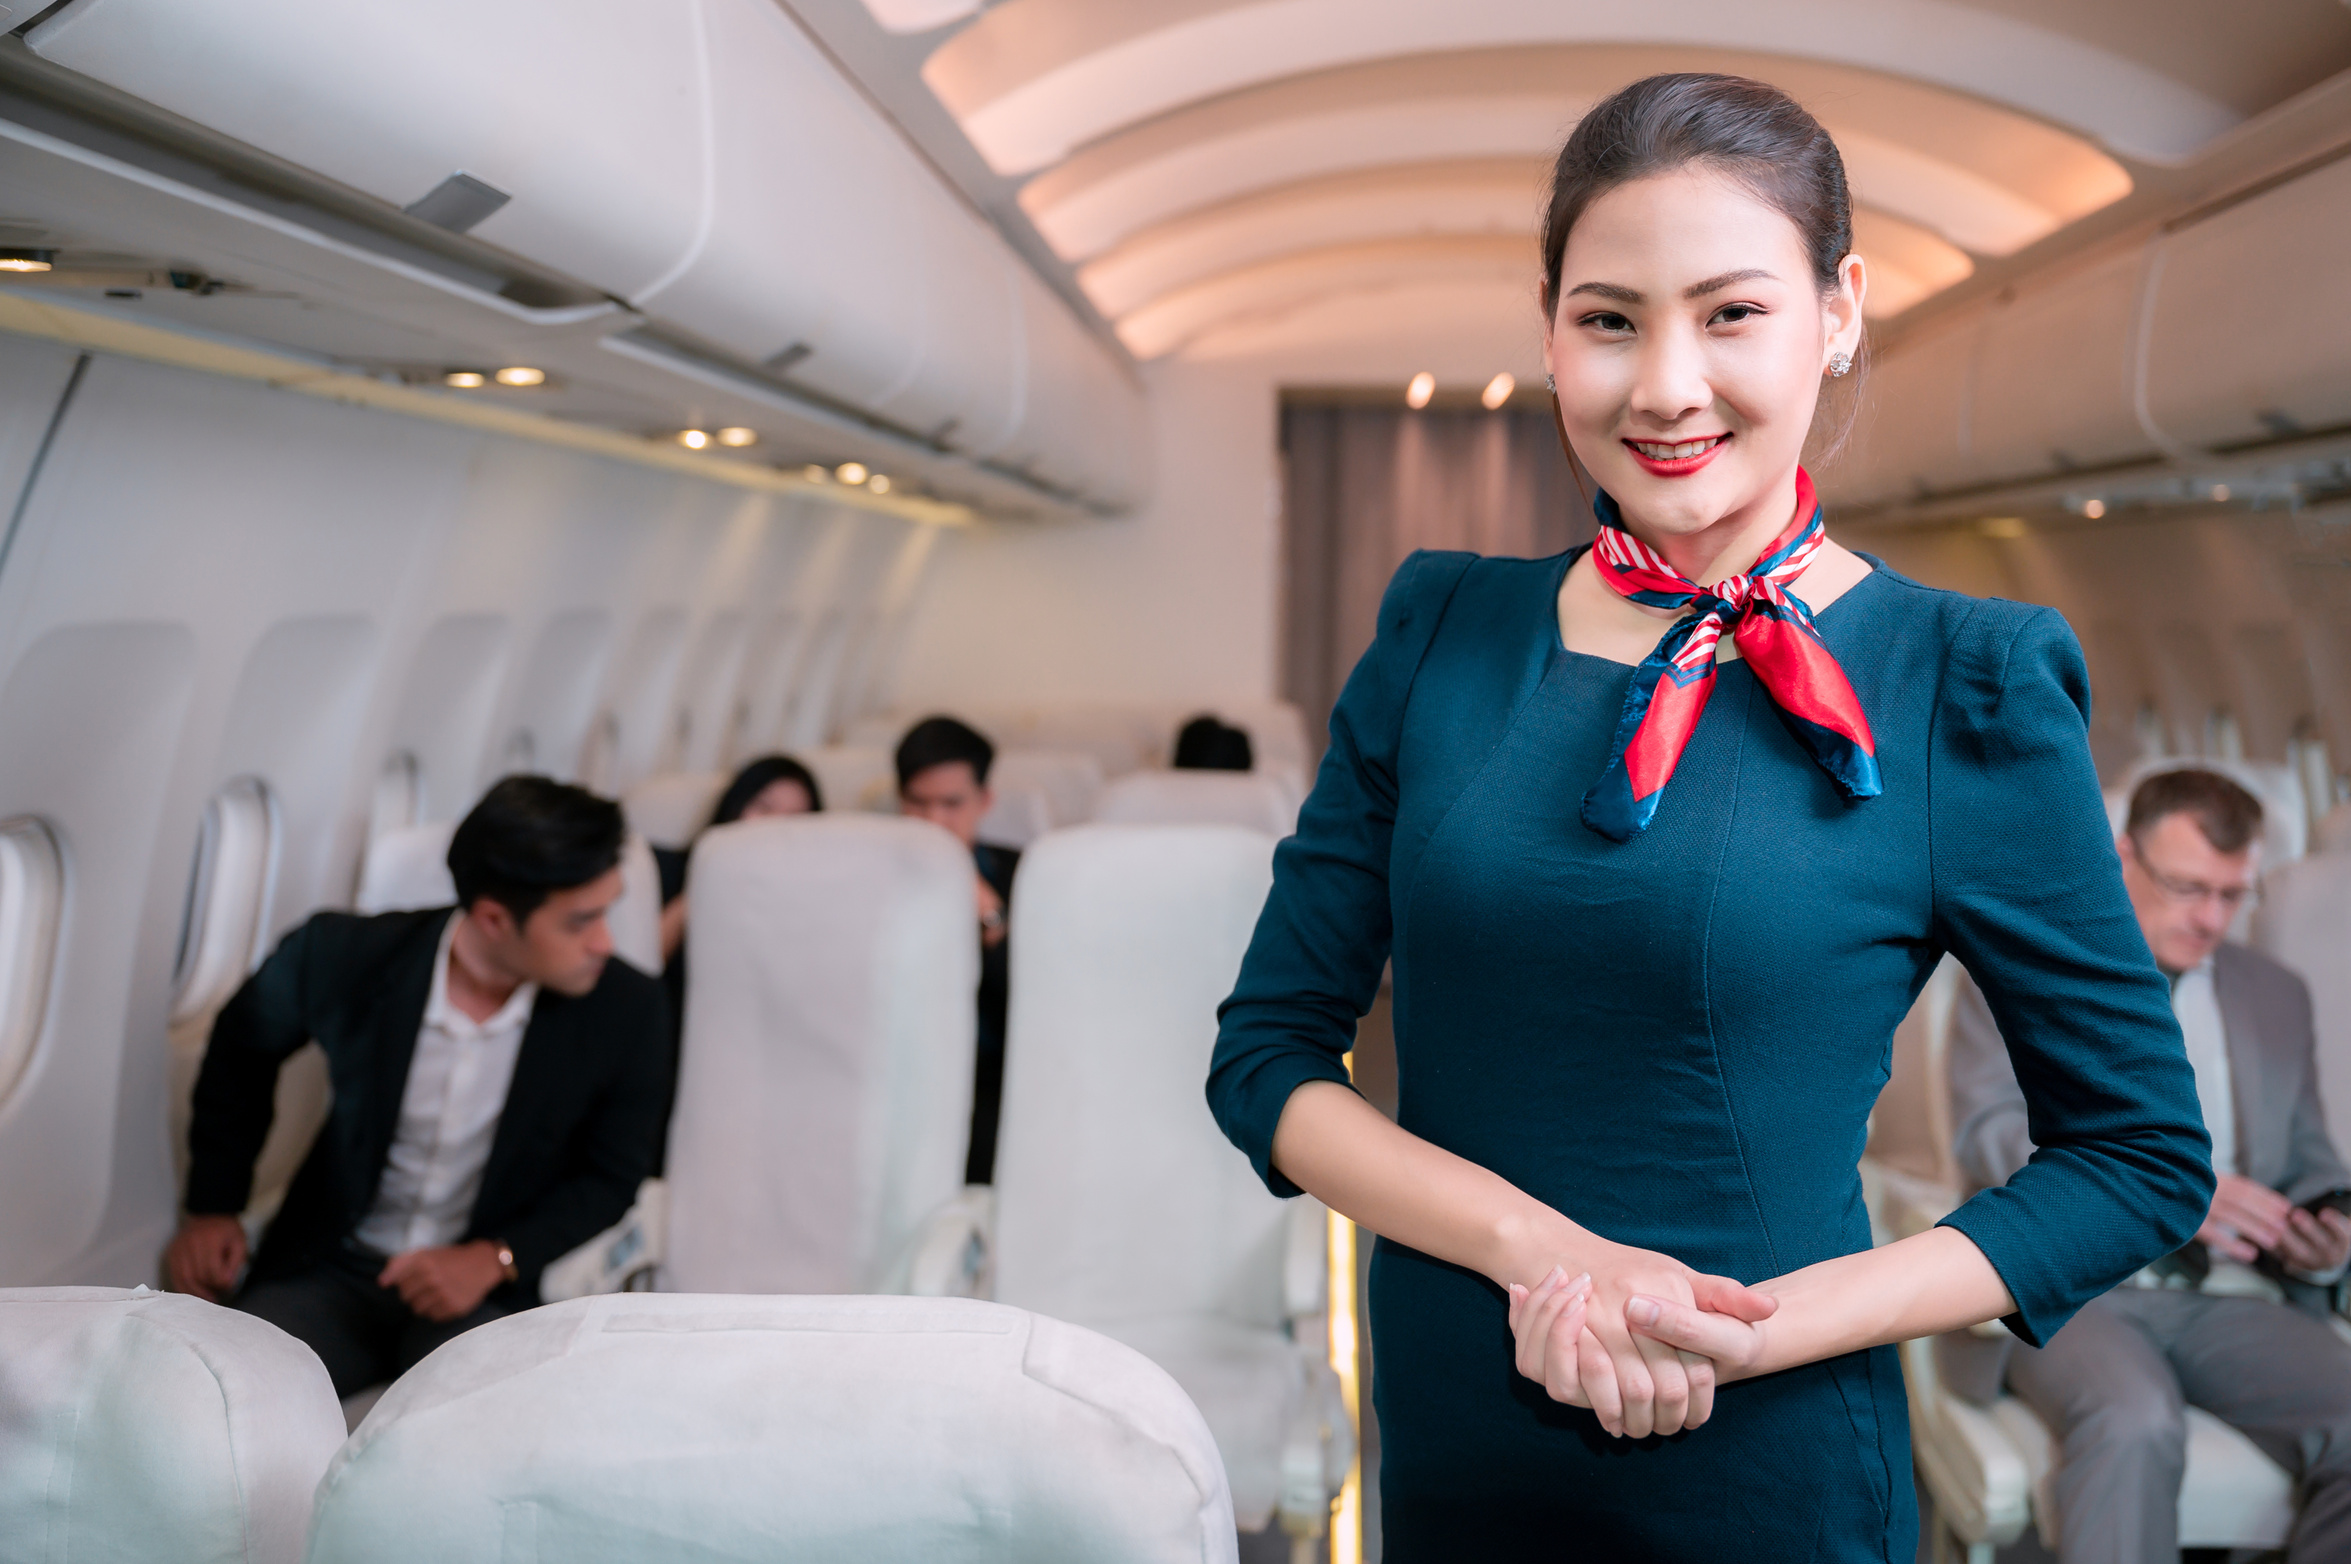 Beautiful flight attendant in an airplane smiling